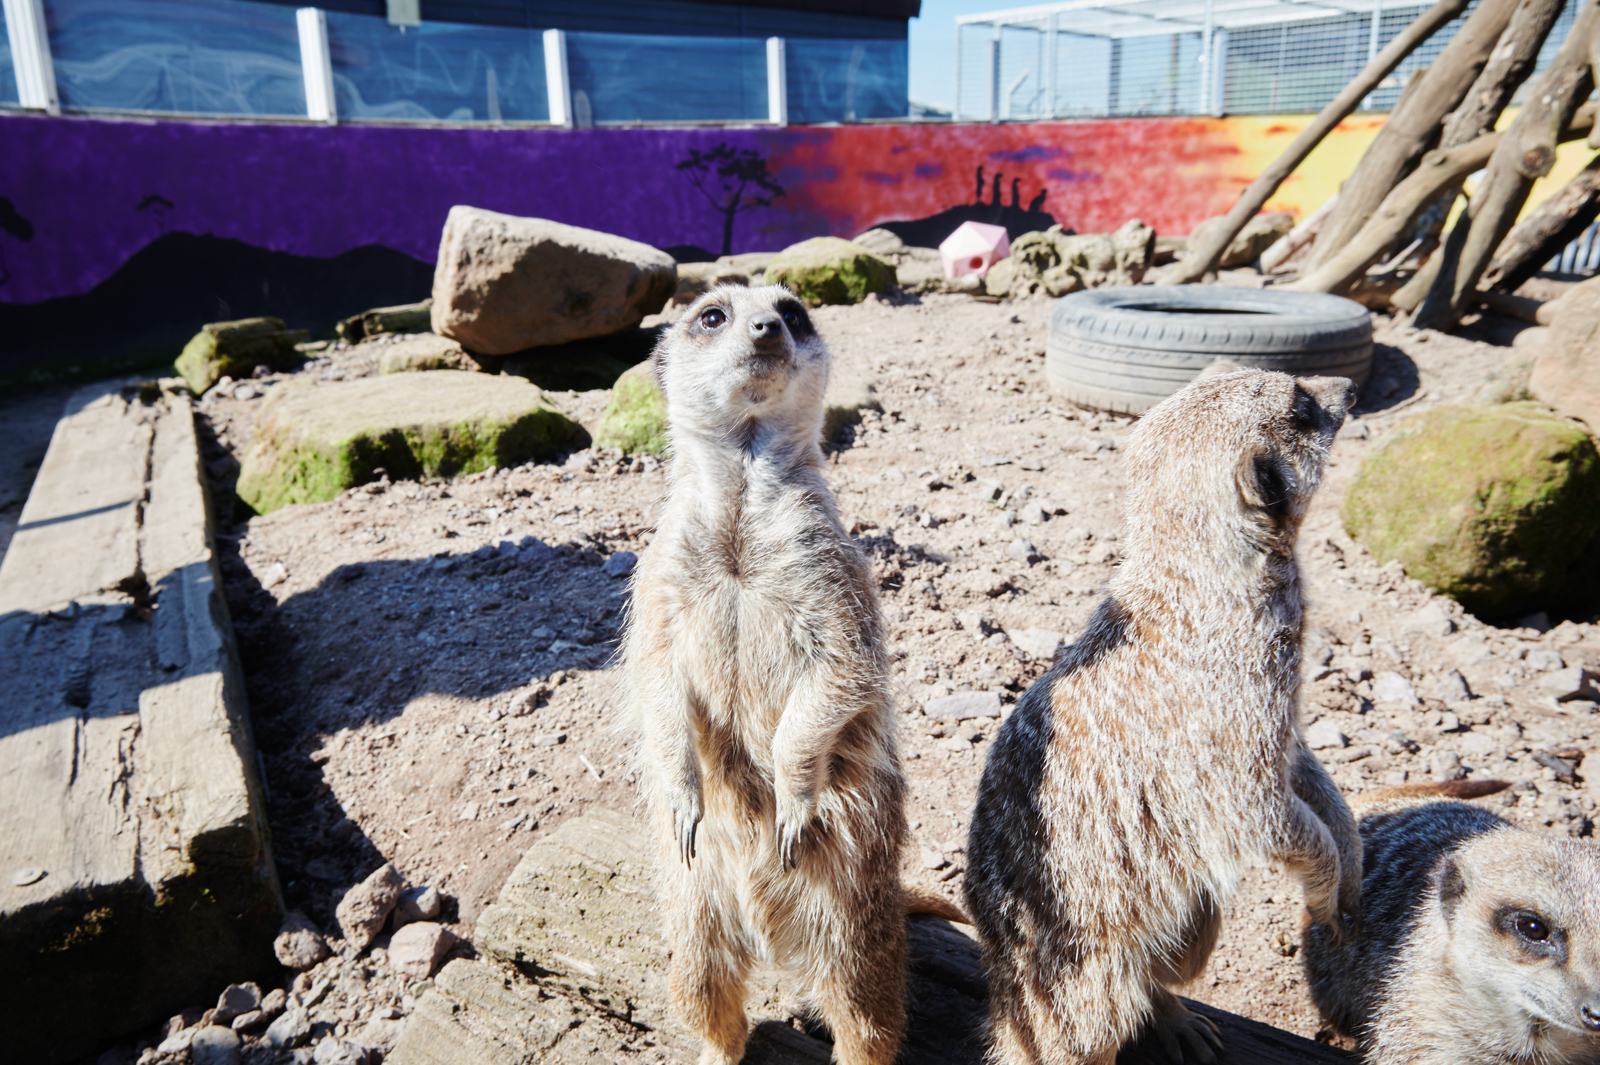 A close up shot of three meerkats in an outdoor enclosure with the sun shining at Walford College